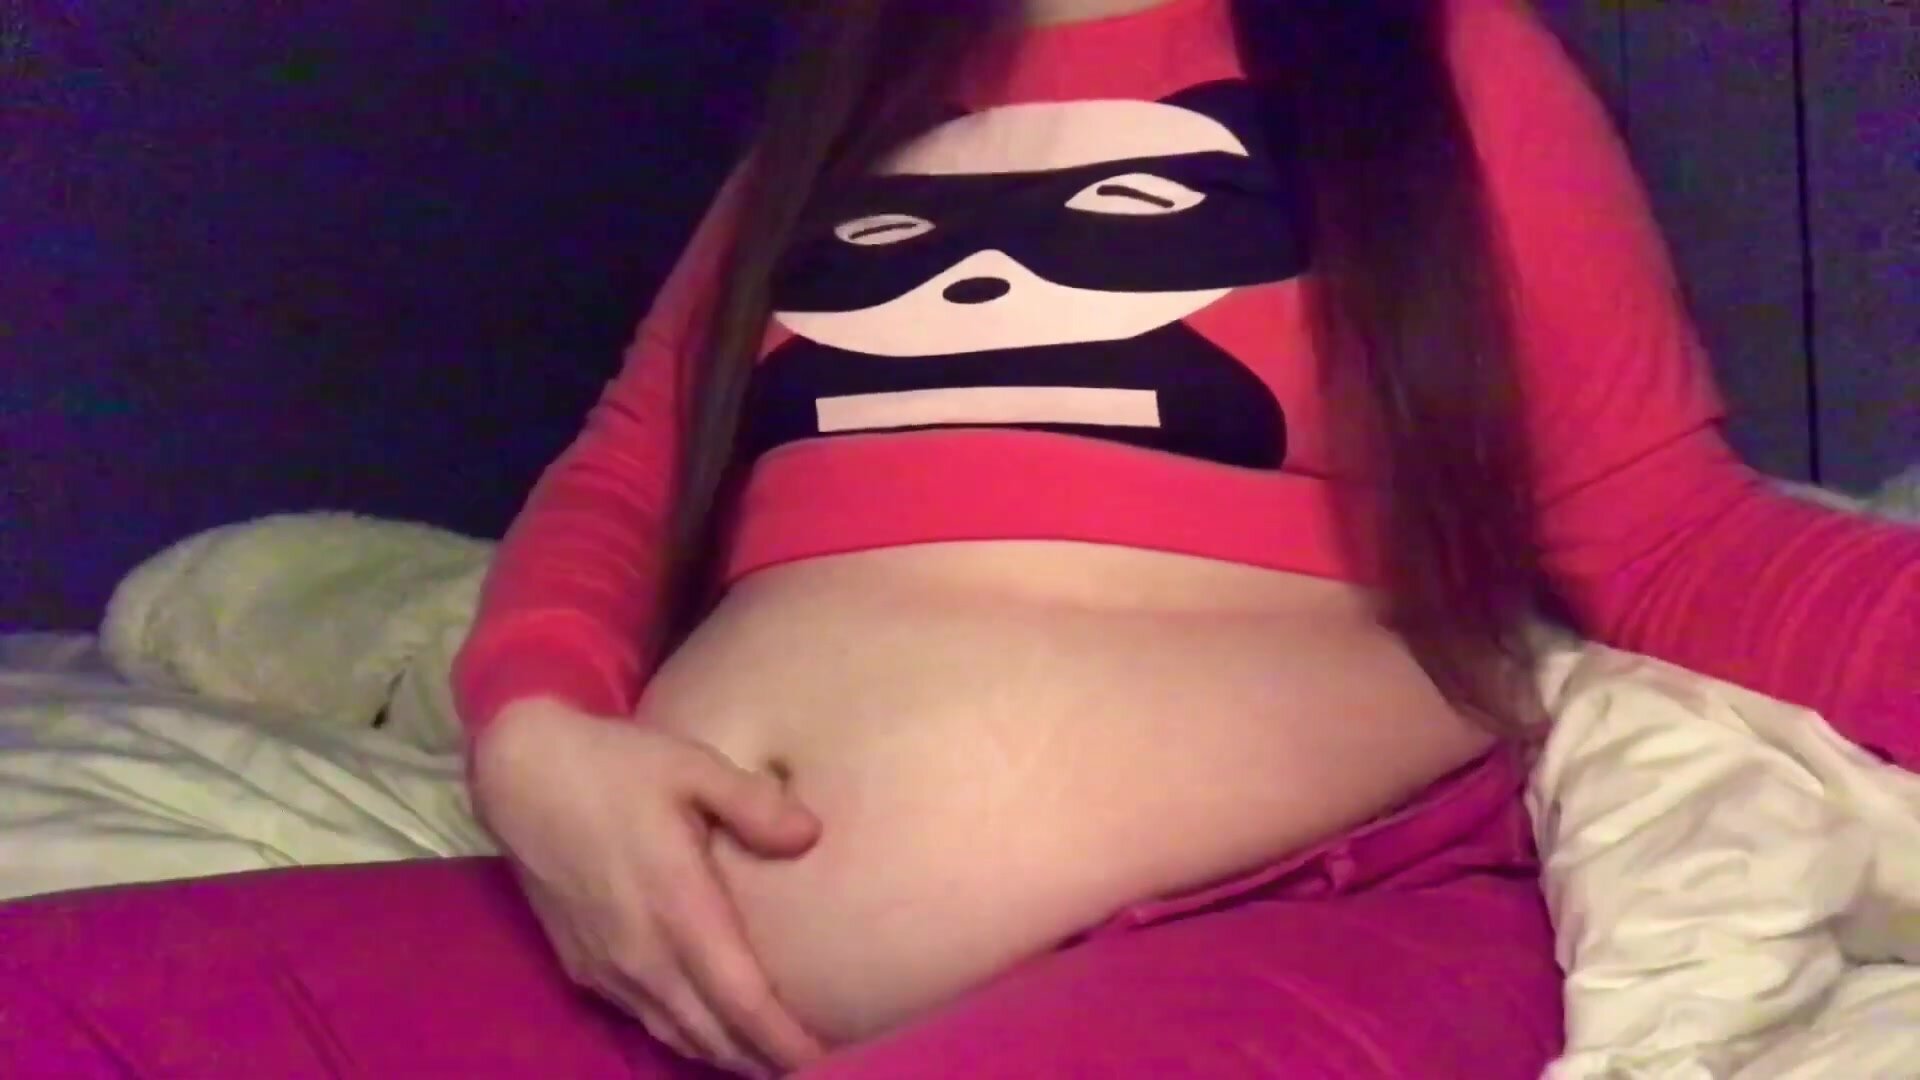 Soft Belly Play in Tight Pants